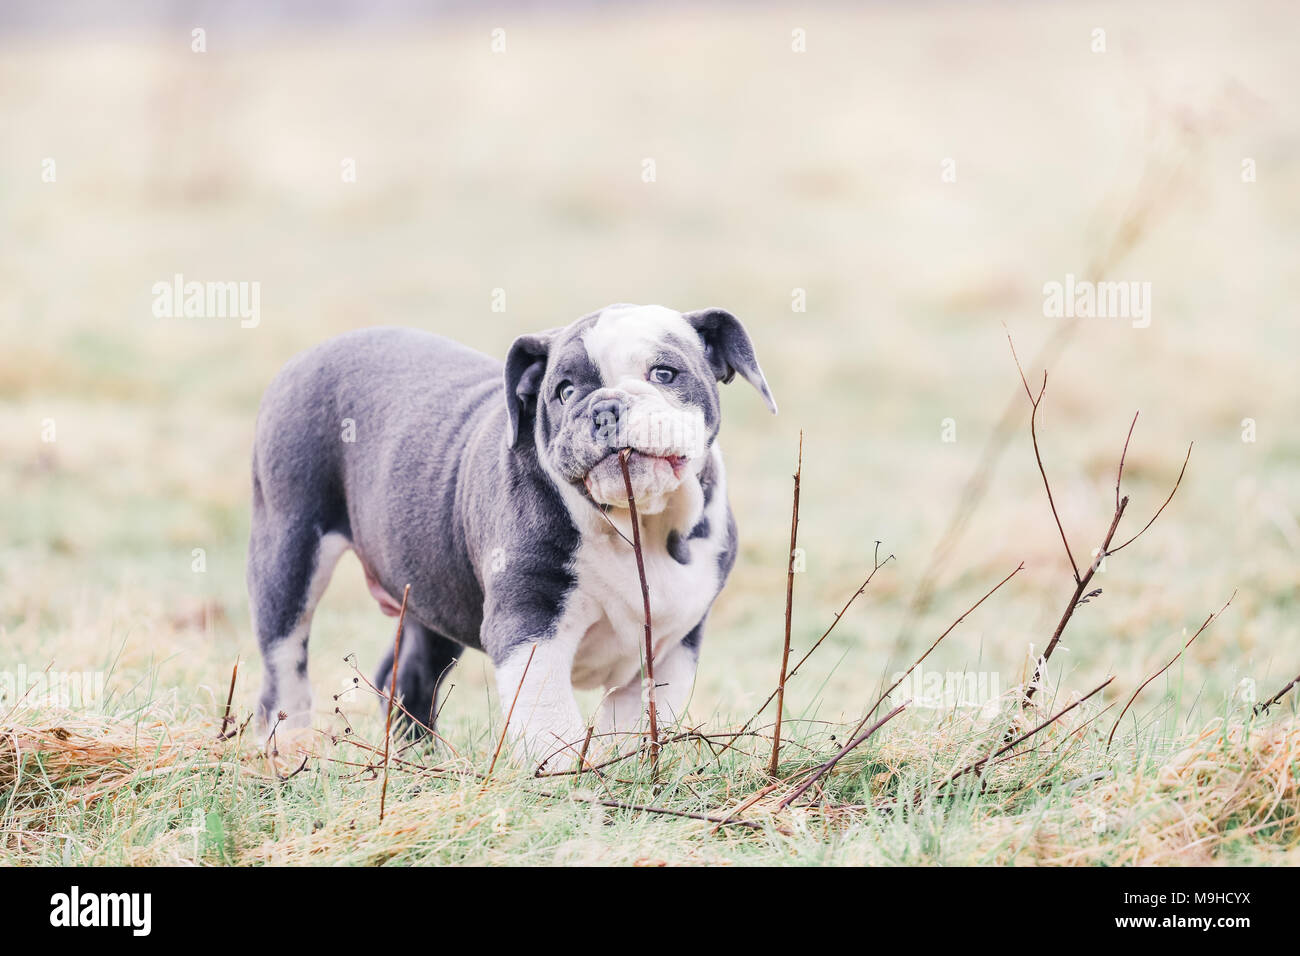 Blue English / British Bulldog puppy out for a walk in the countryside, UK Stock Photo